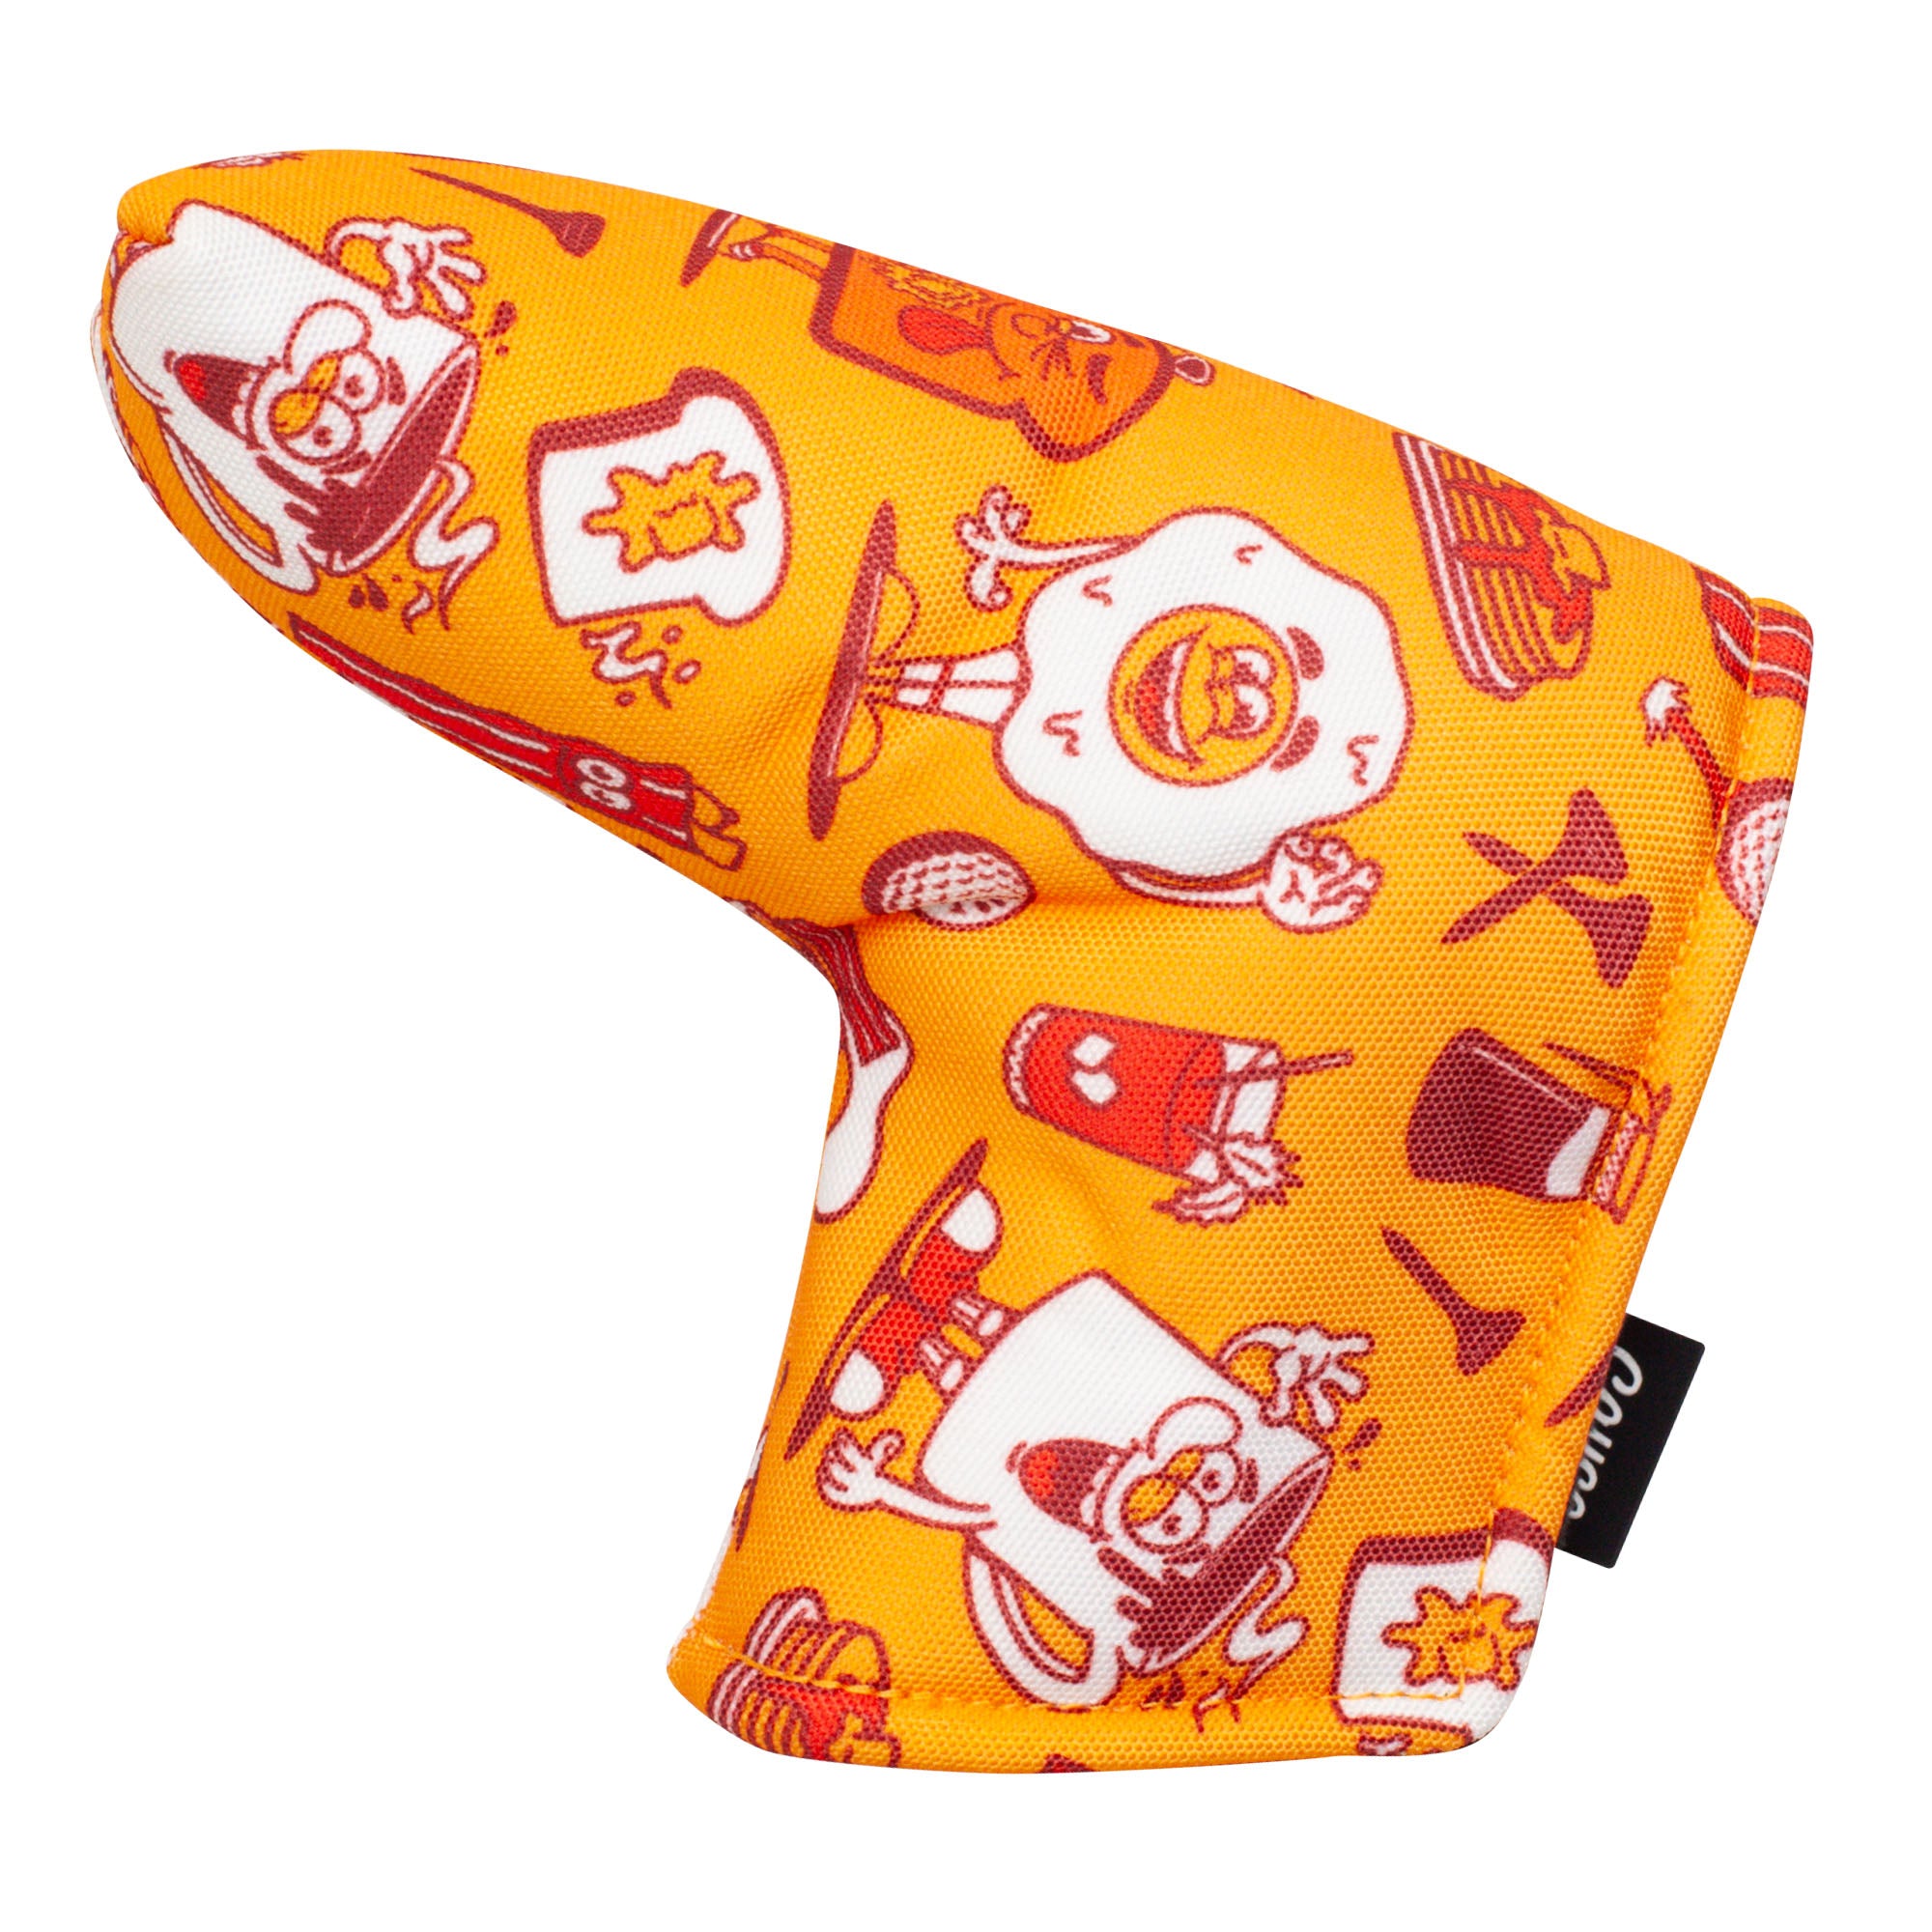 Breakfast Club Putter Cover